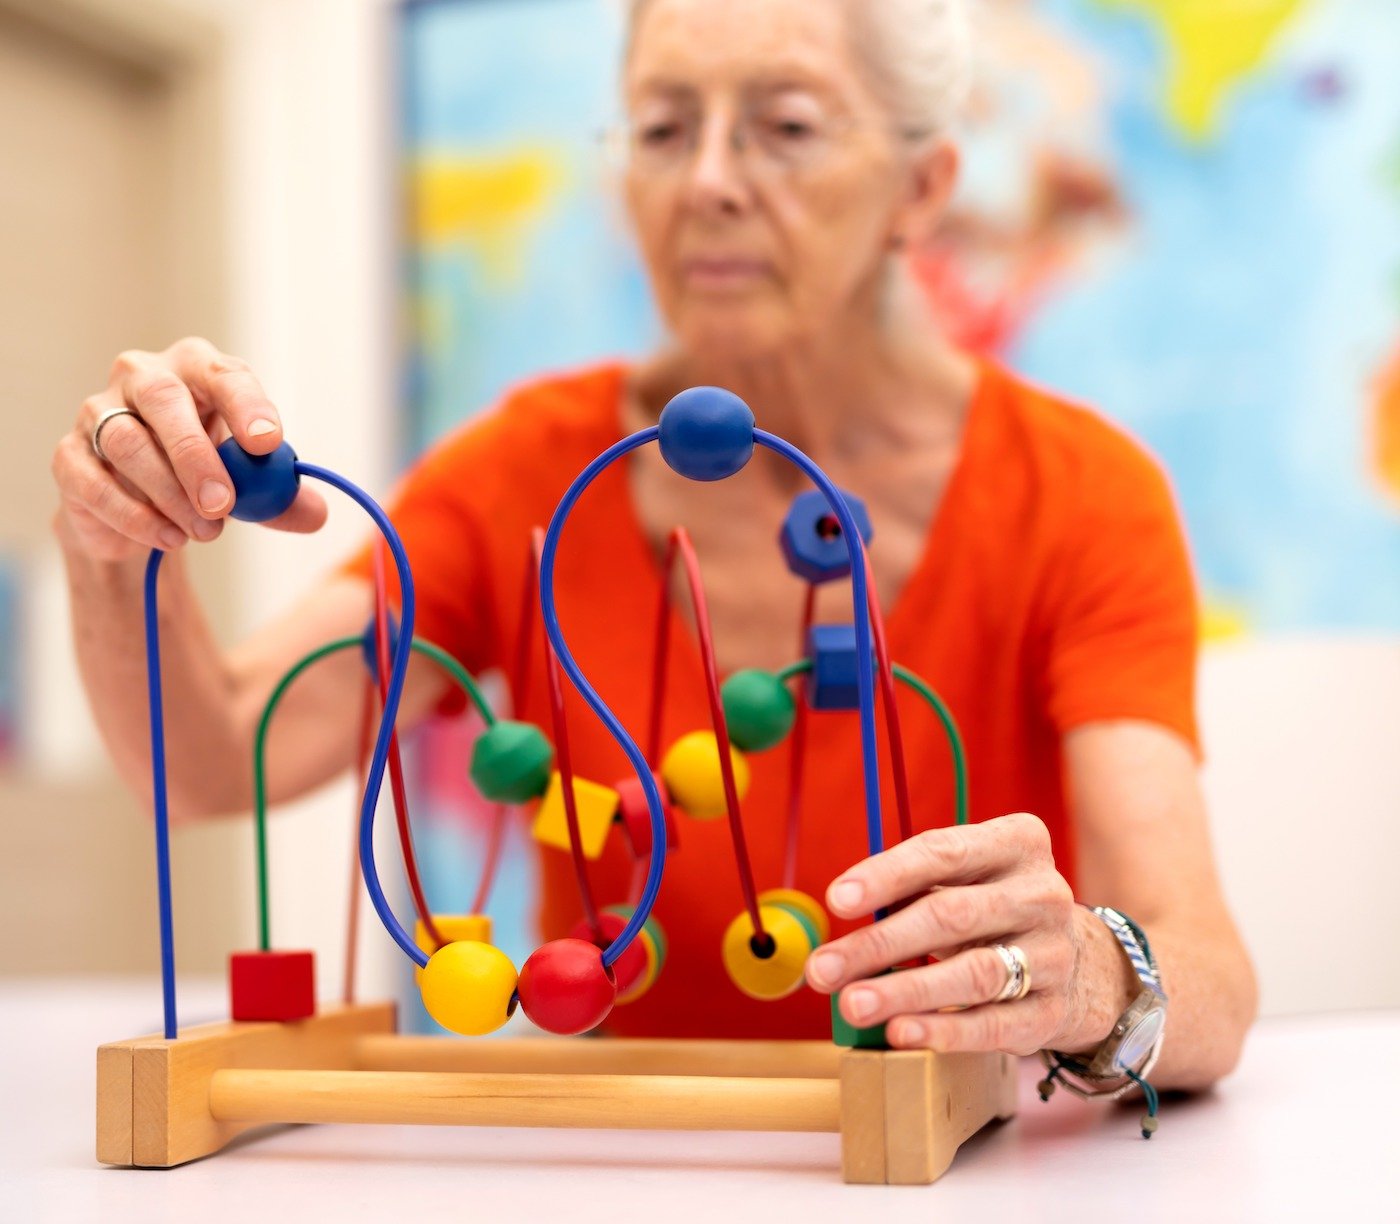 A senior woman plays with a sensory stimulating toy